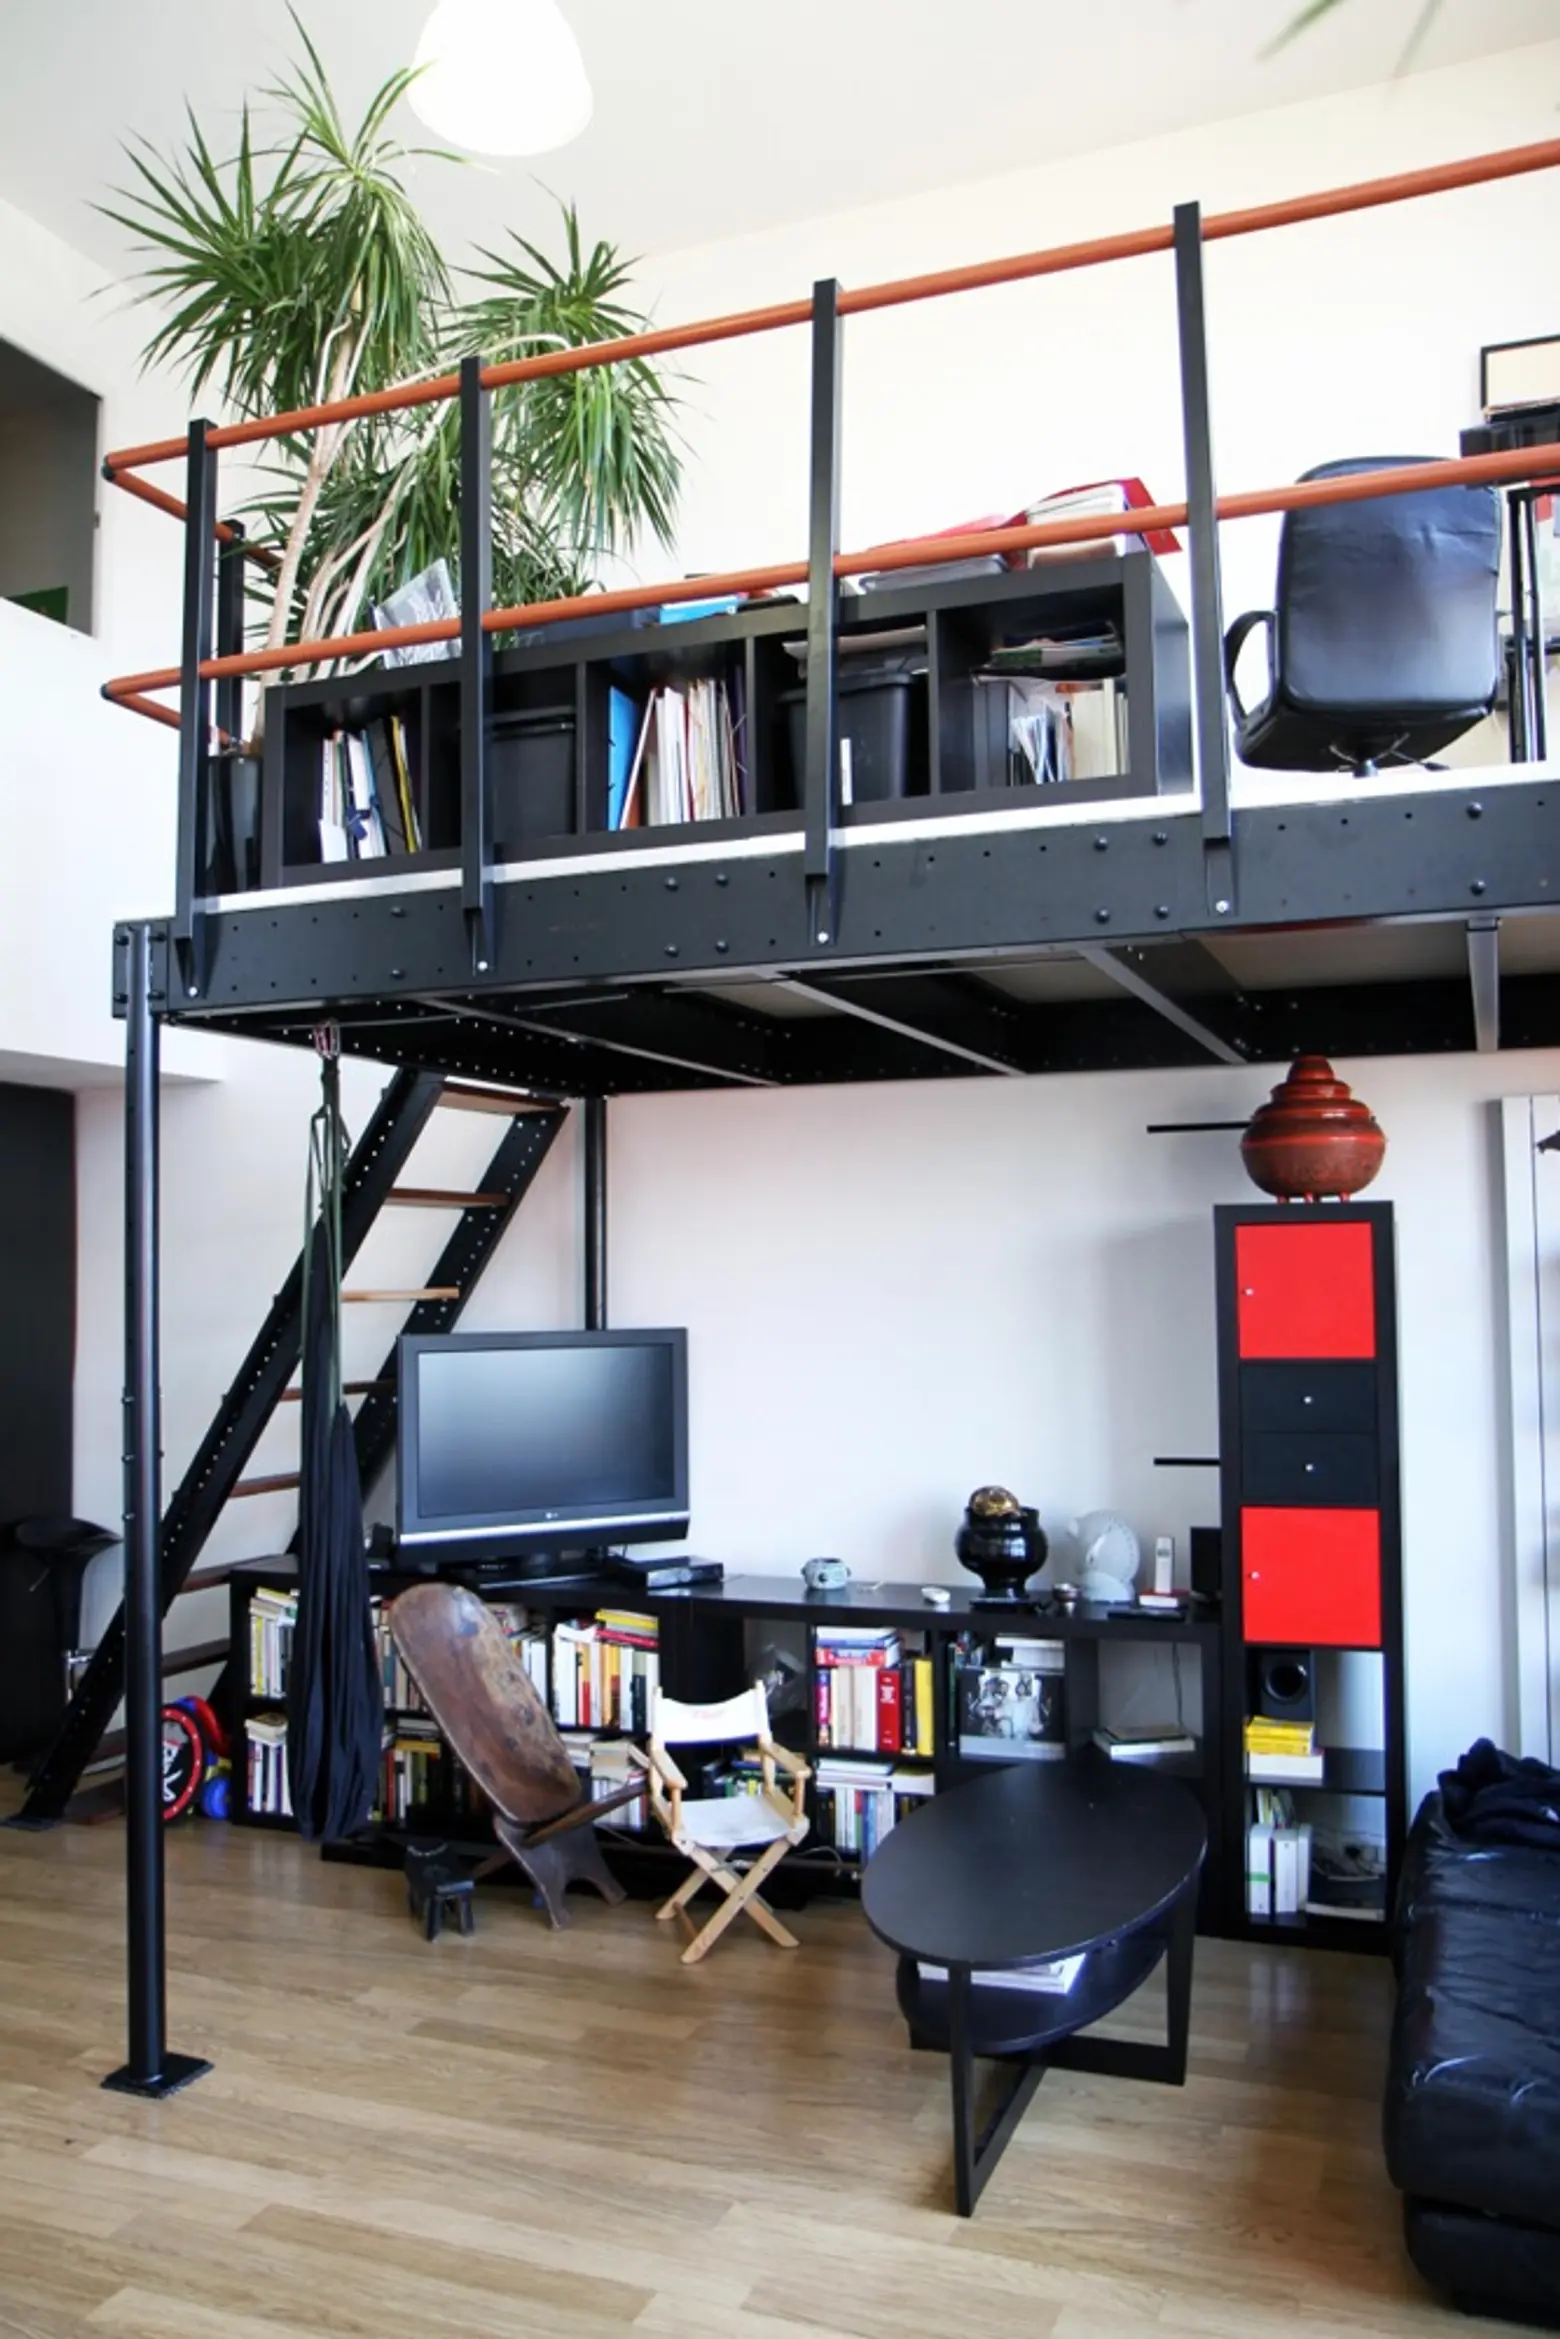 DIY Loft Kit, microloft, tiny apartment solutions, how to make more space in a small apartment